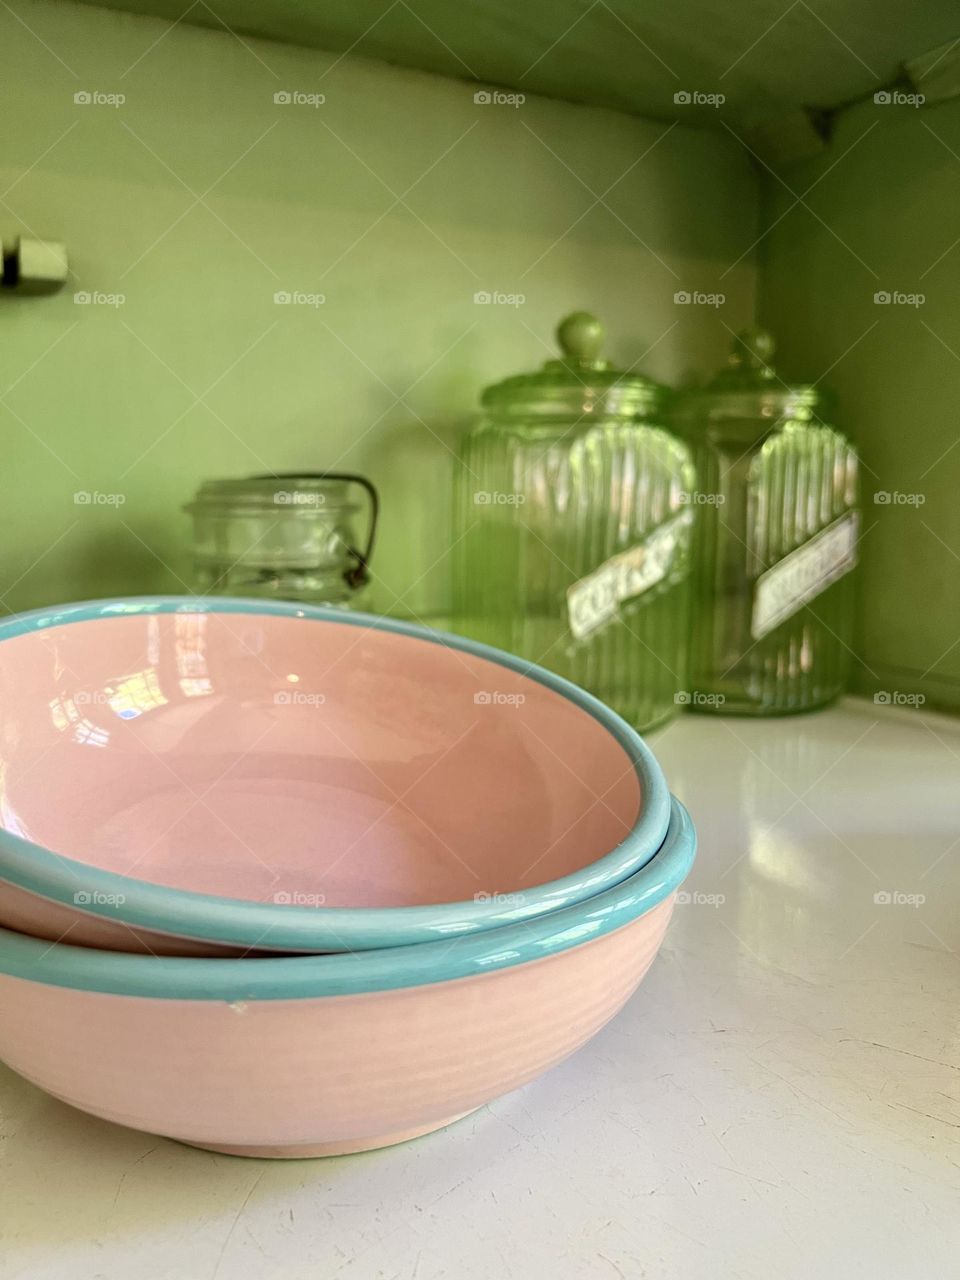 Pink ceramic bowls with baby blue rims on an antique green cupboard, with glass containers in the background 